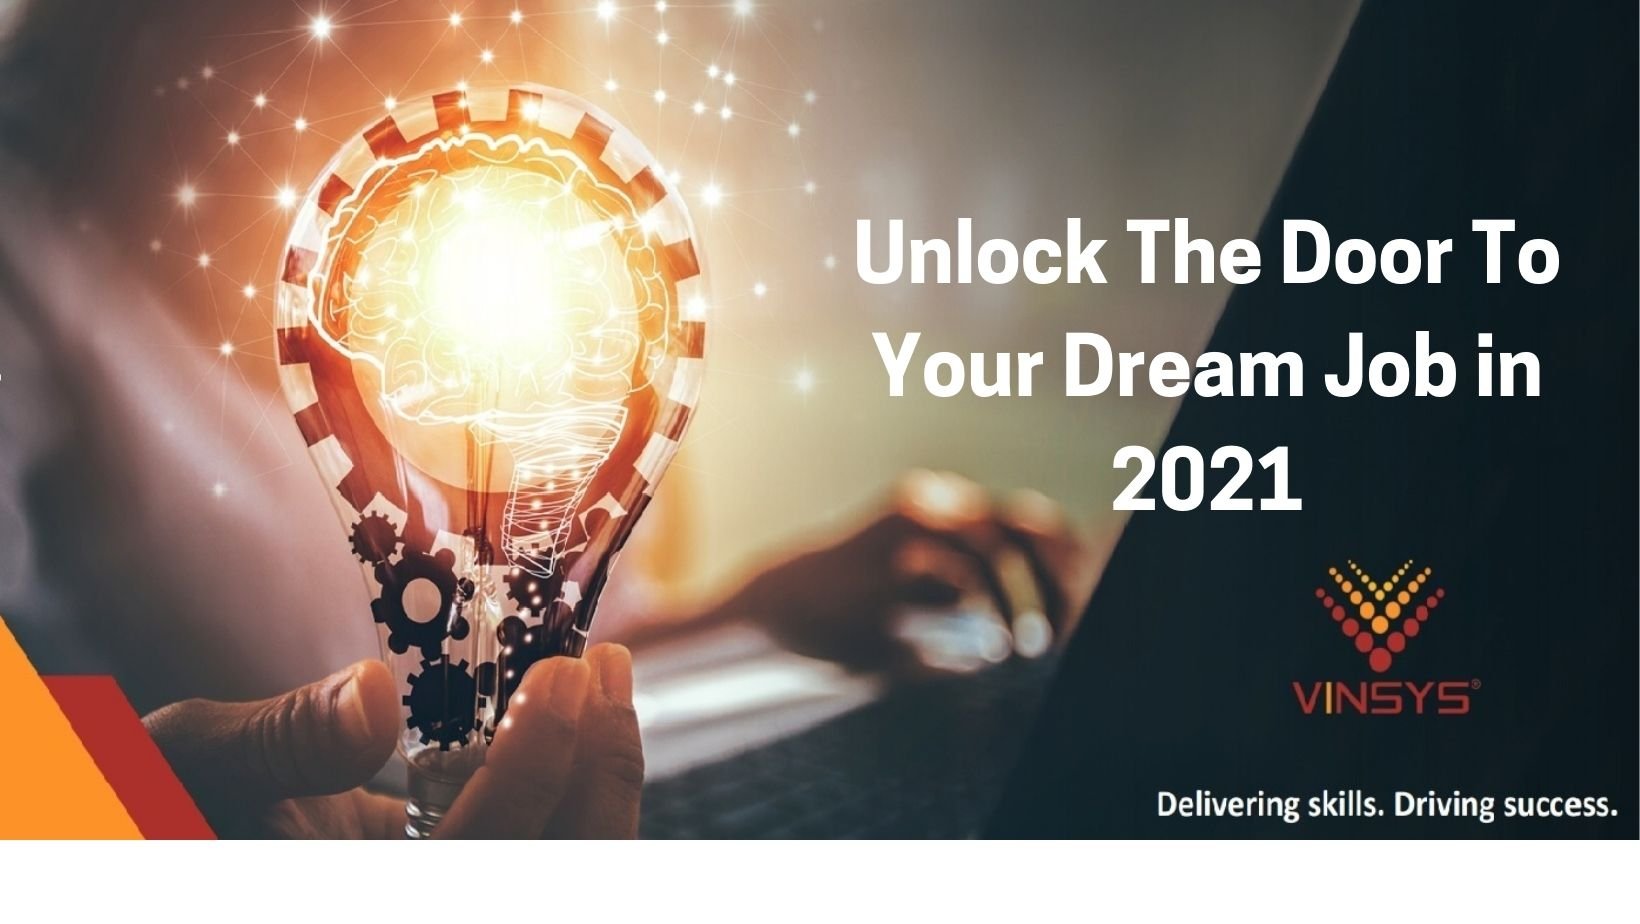 Top 7 Courses To Help You Land In Your Dream Job in 2021